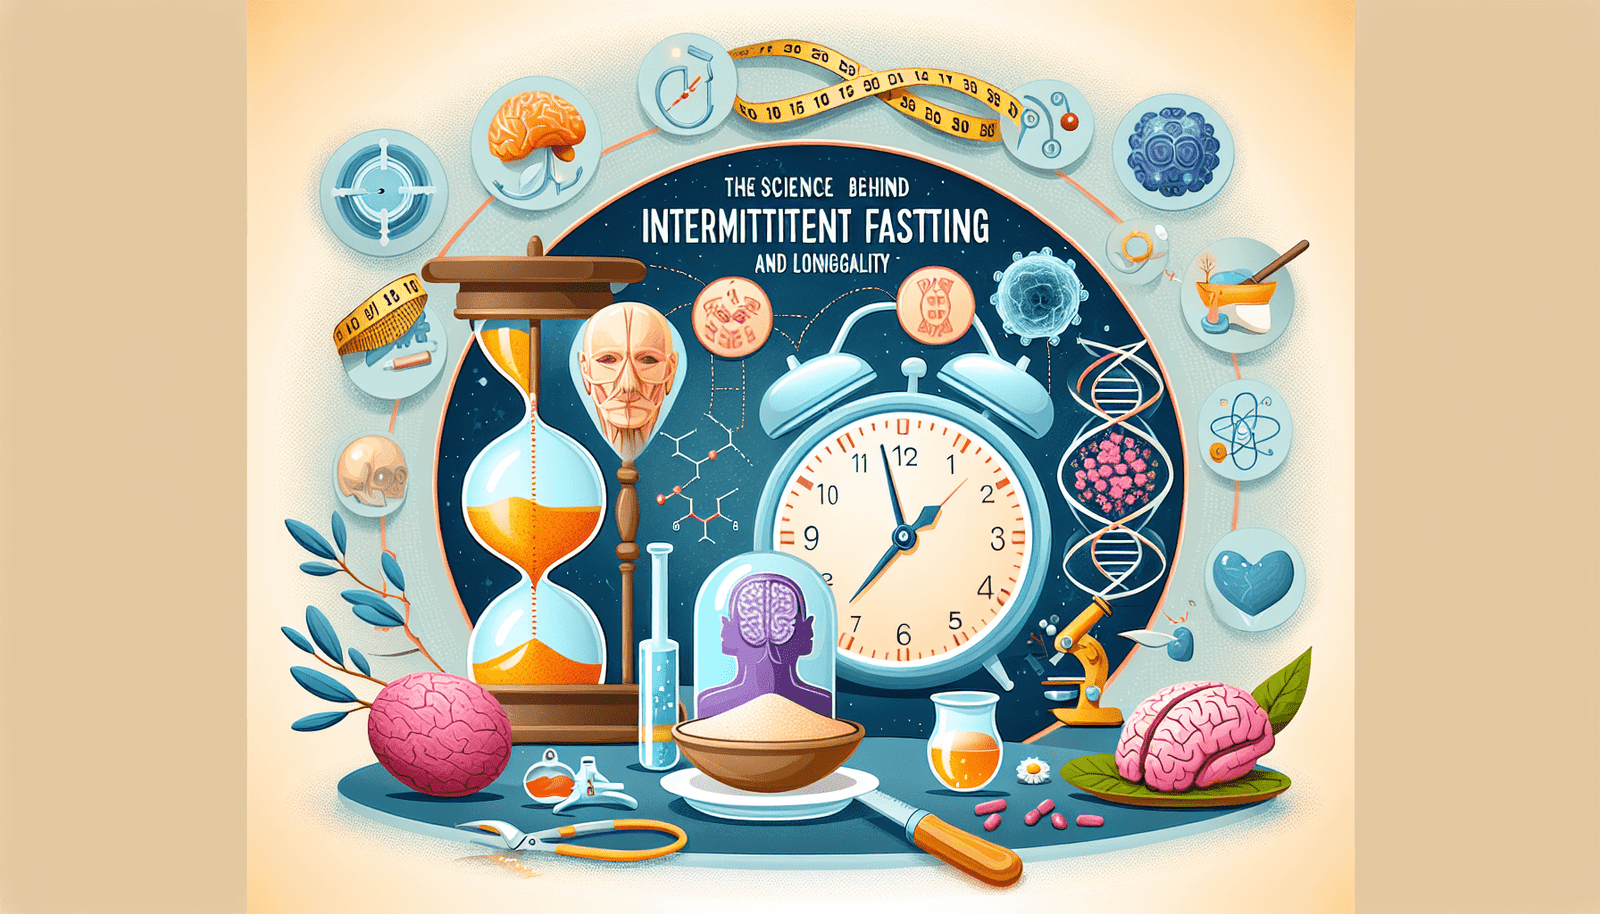 The Science Behind Intermittent Fasting And Longevity